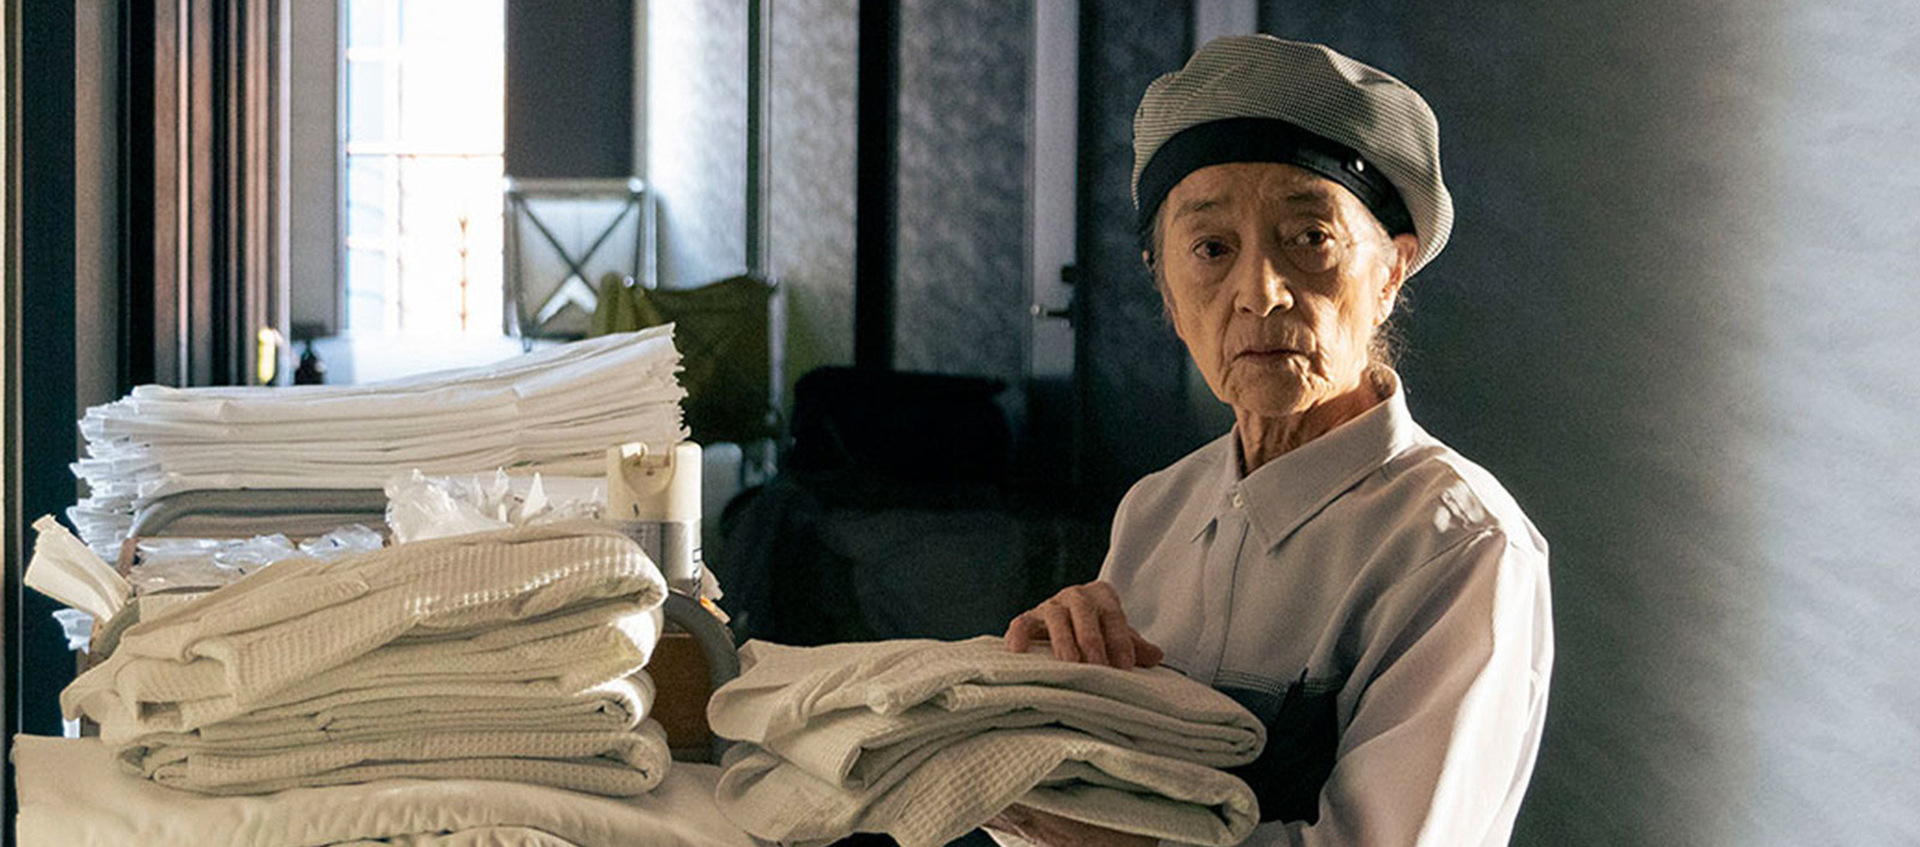 An older Japanese person in a work uniform holds folded laundry and looks into the distance beyond the viewer.